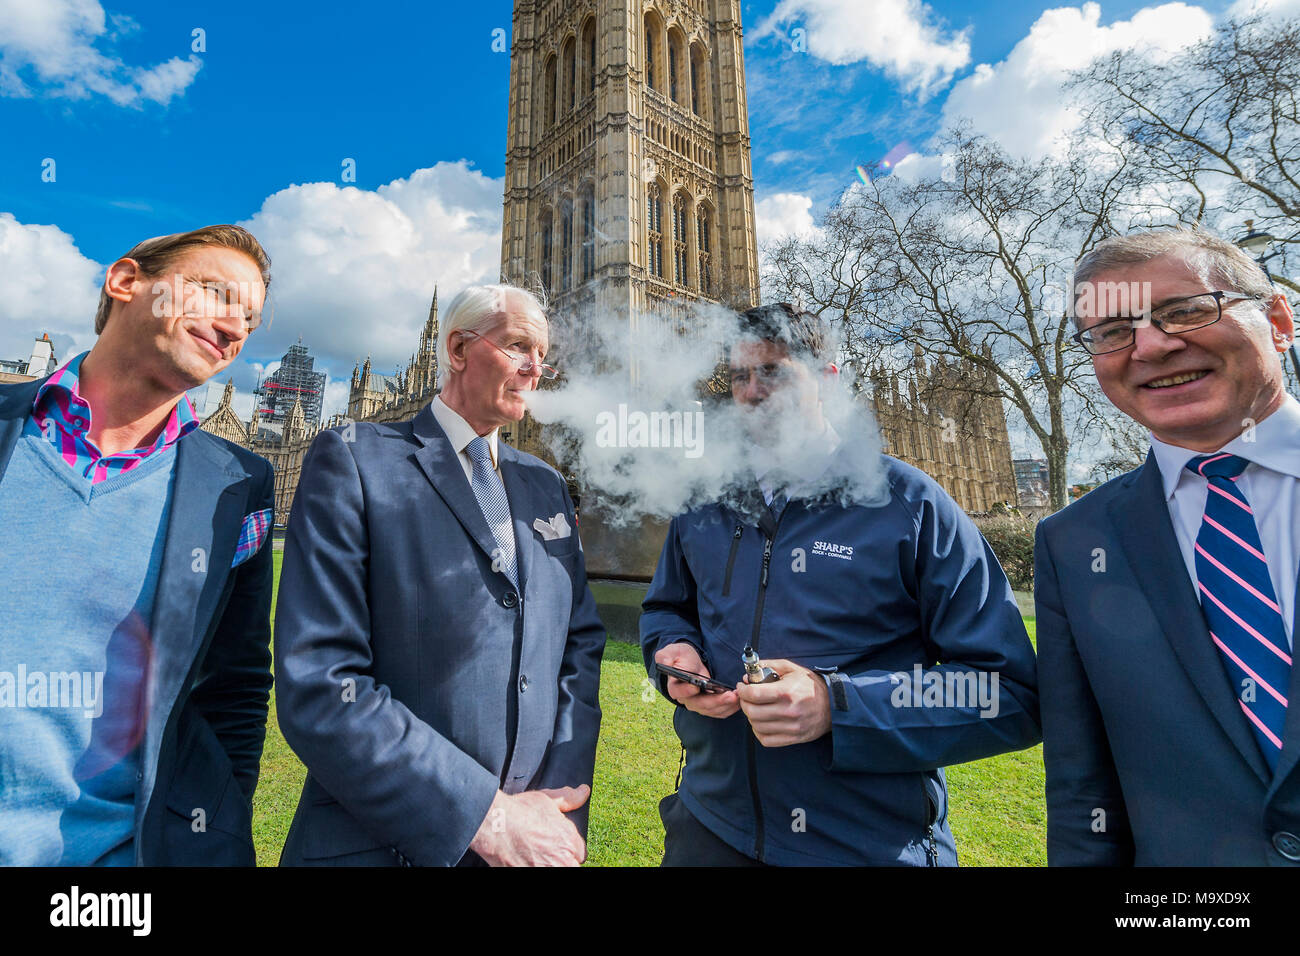 London, UK. 29th Mar, 2018. Dr Christian Jessen, Lord Cathcart, Scott Mann  MP, and Mark Pawsey MP - The All Party Parliamentary Group for E-Cigarettes  launch VApril, a nationwide campaign being fronted